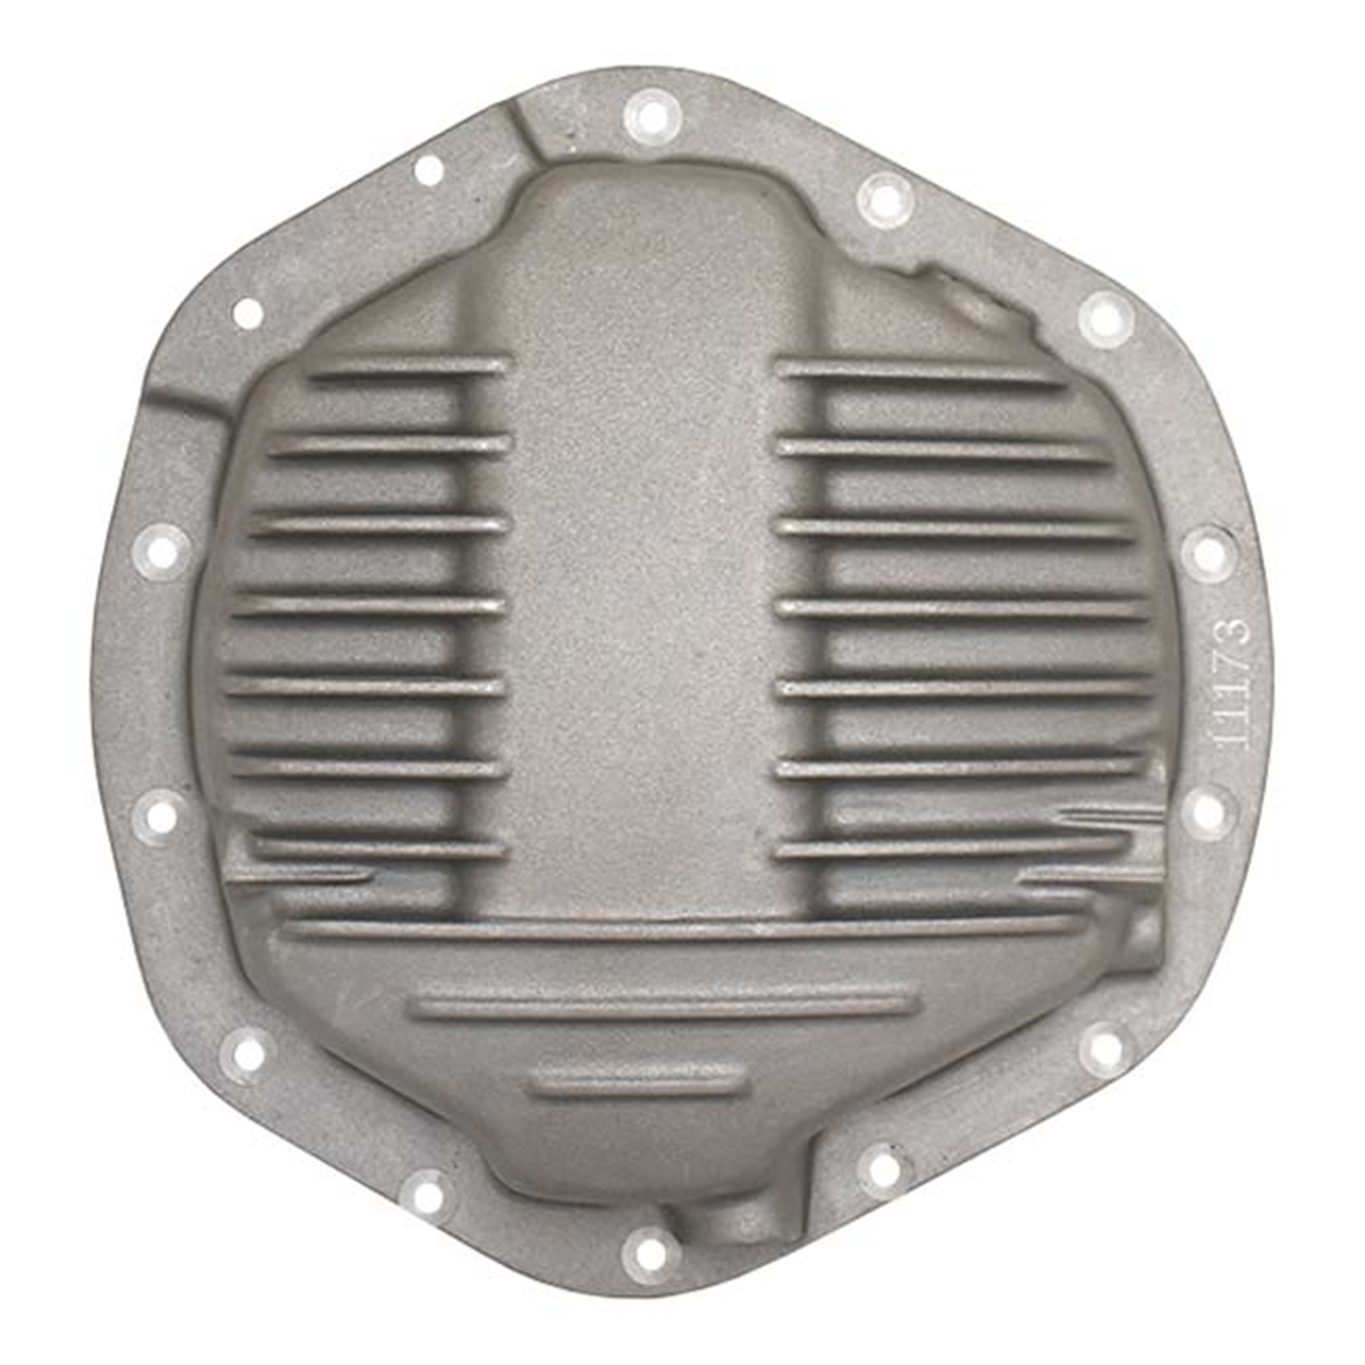 AAM for 2020 & Newer GM/Allison Trucks, Differential Cover